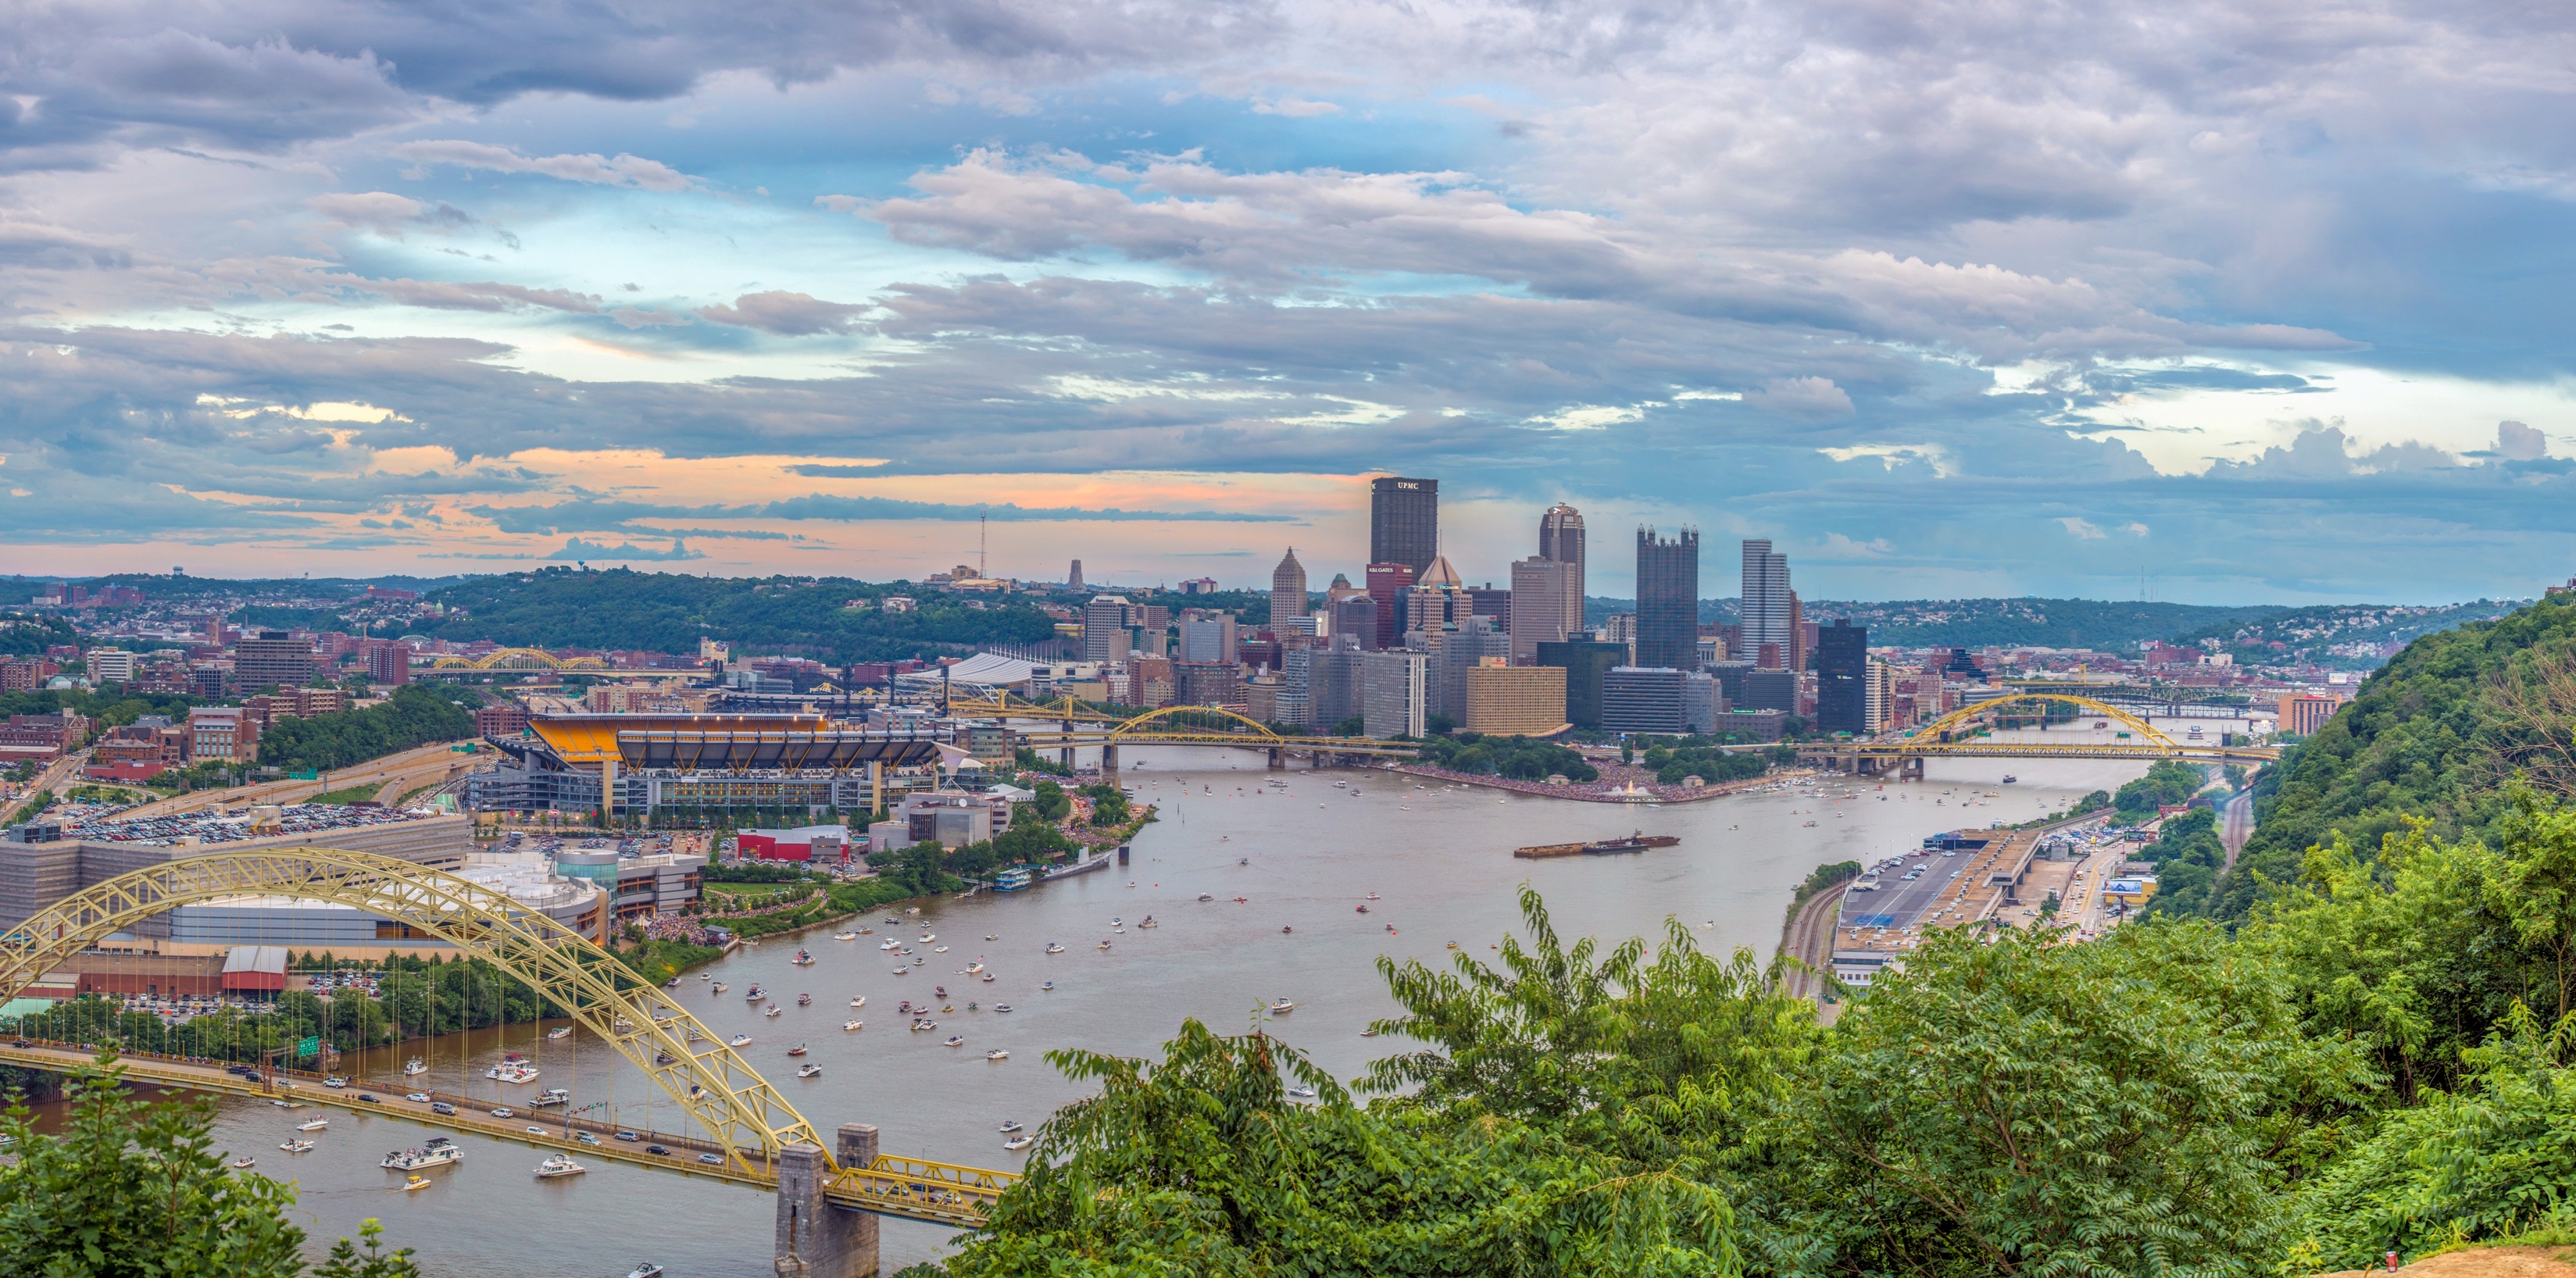 Photogenic spots in Pittsburgh, Local photographer, Picture-perfect locations, Visual storytelling, 3300x1640 Dual Screen Desktop